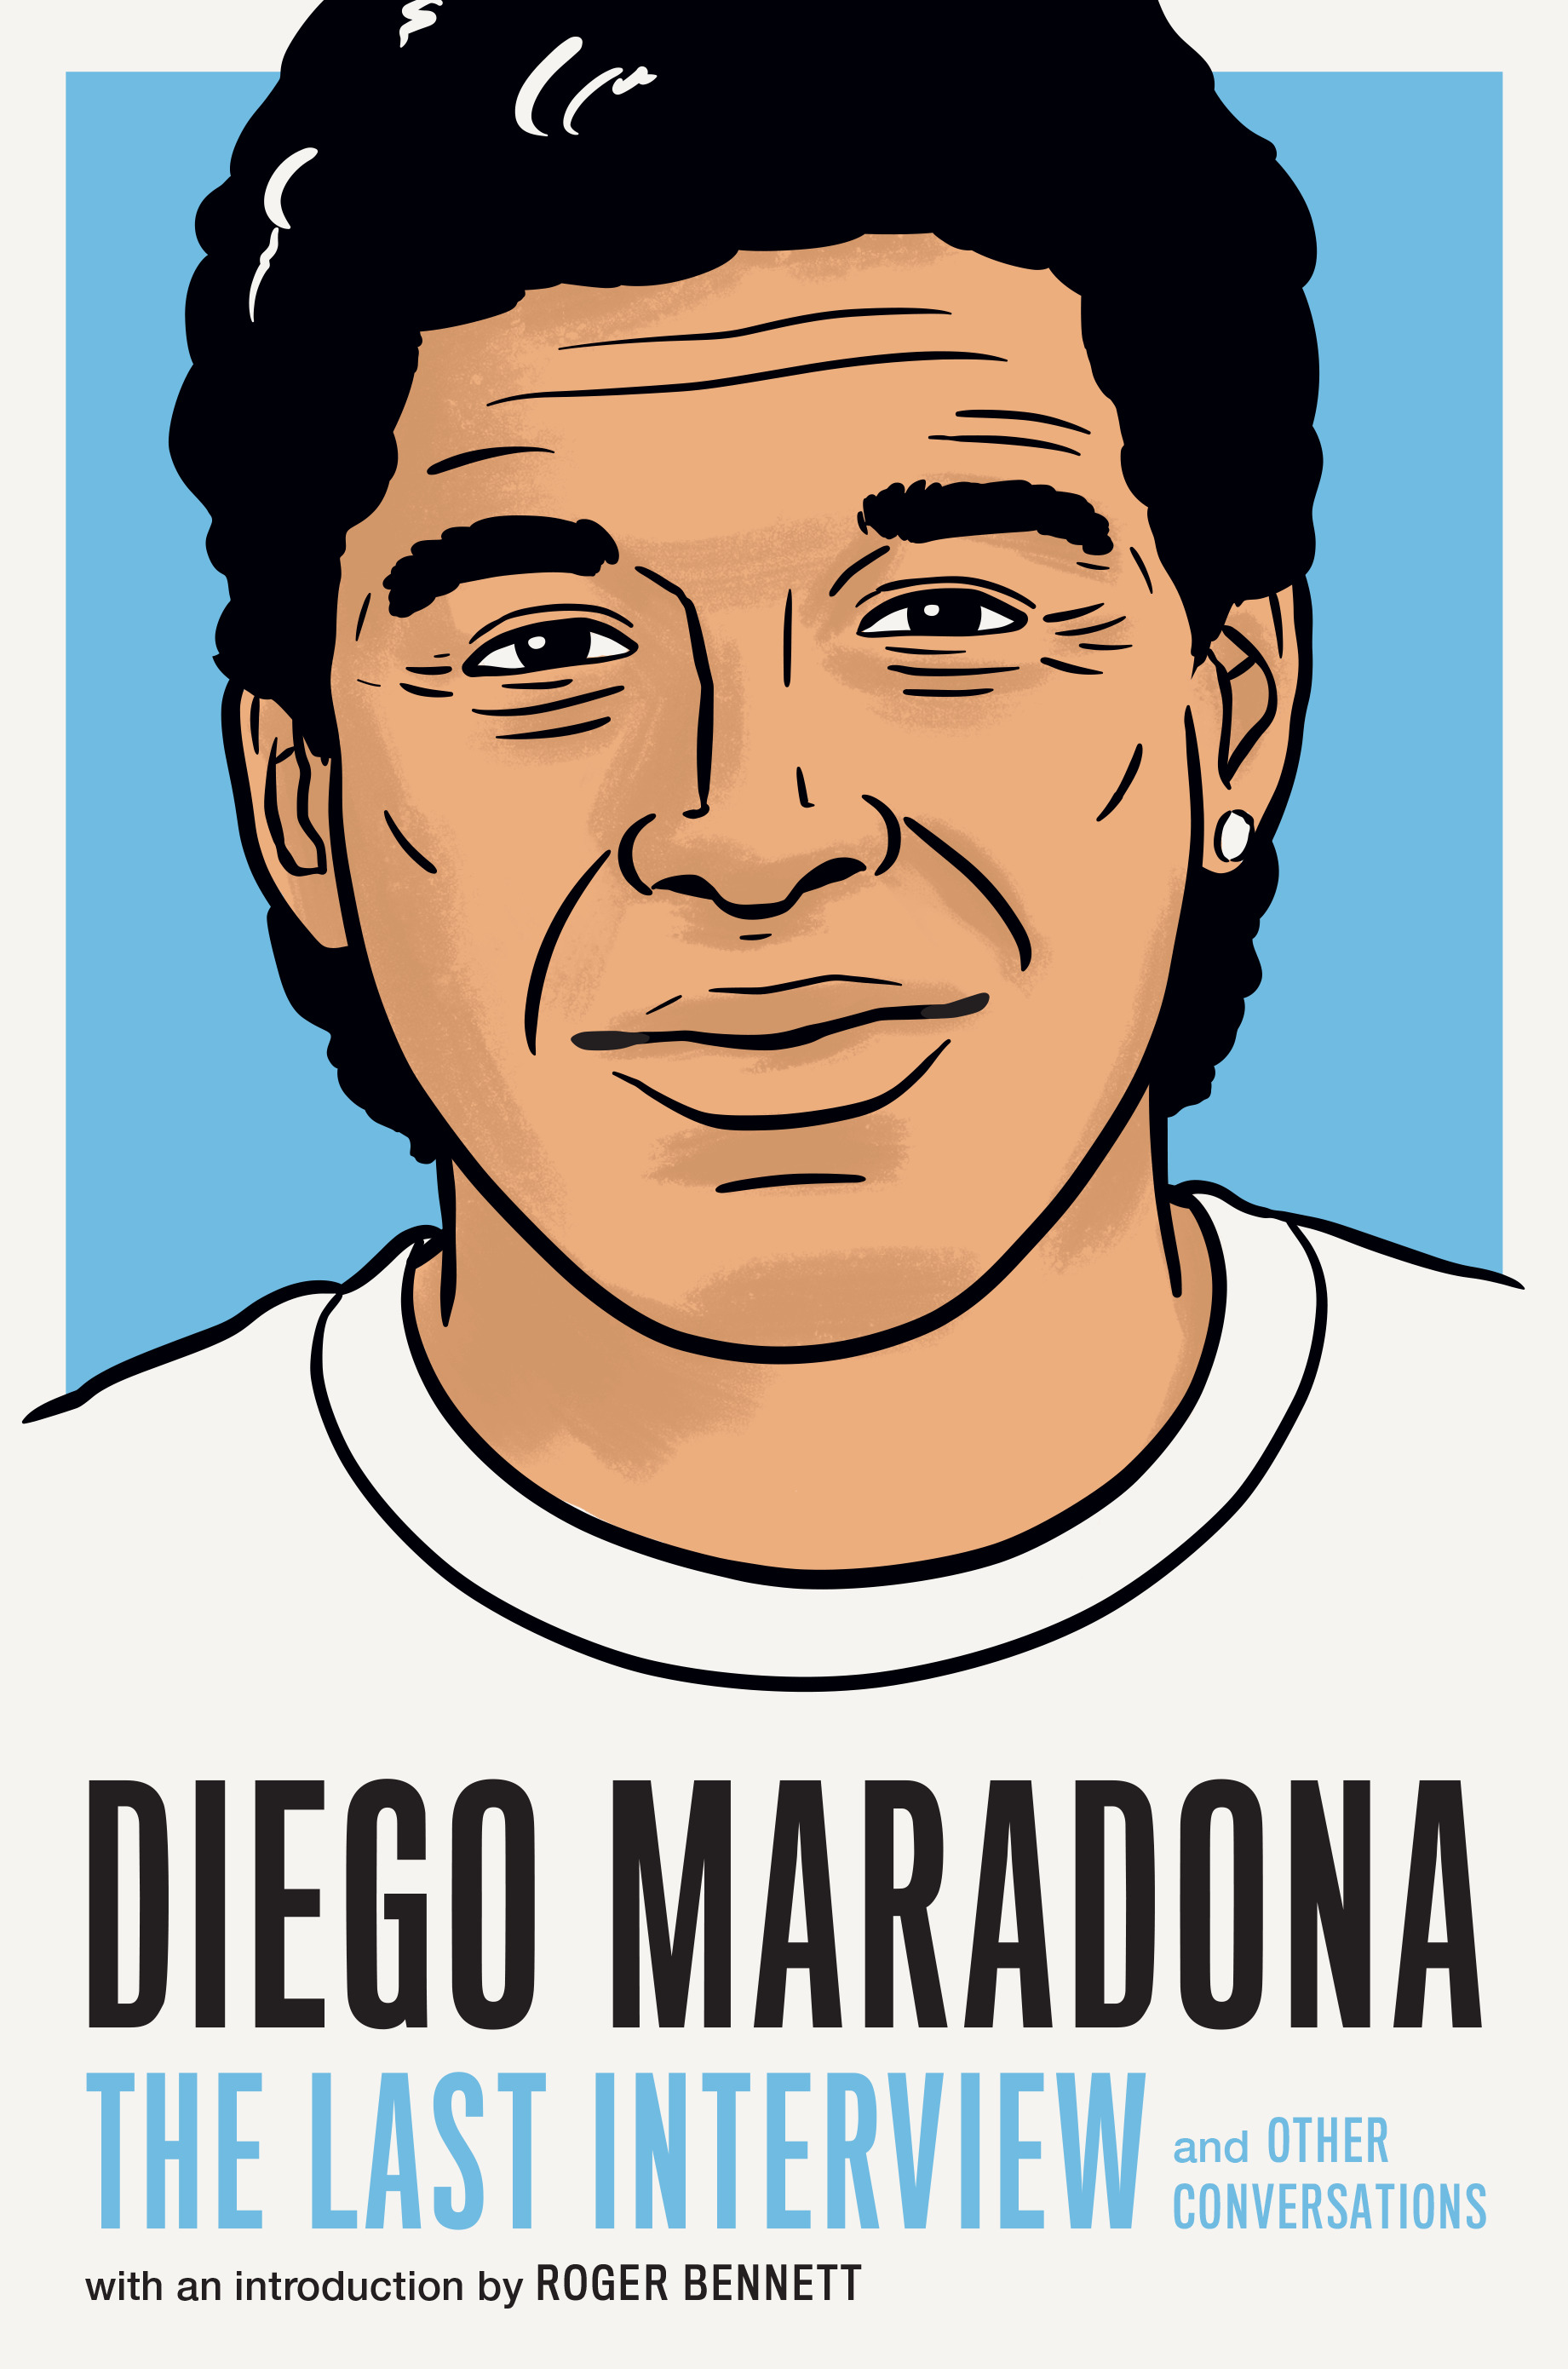 The cover of “Diego Maradona: The Last Interview” from Melville House.